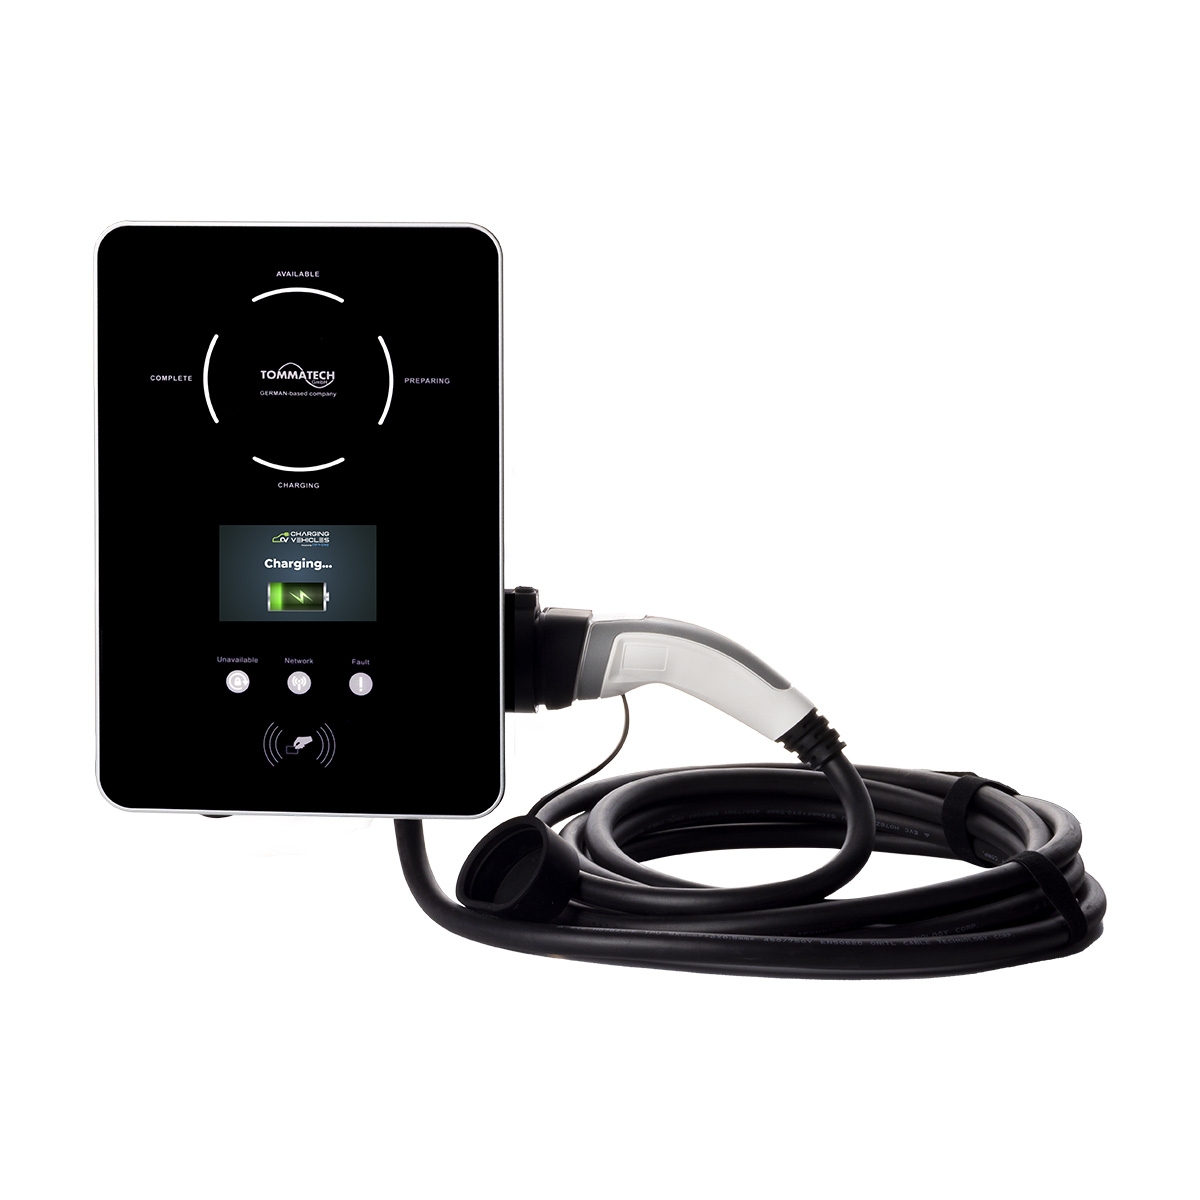 TommaTech Trio 22kW Three Phase/400V AC Electric Vehicle Charging Unit Wired